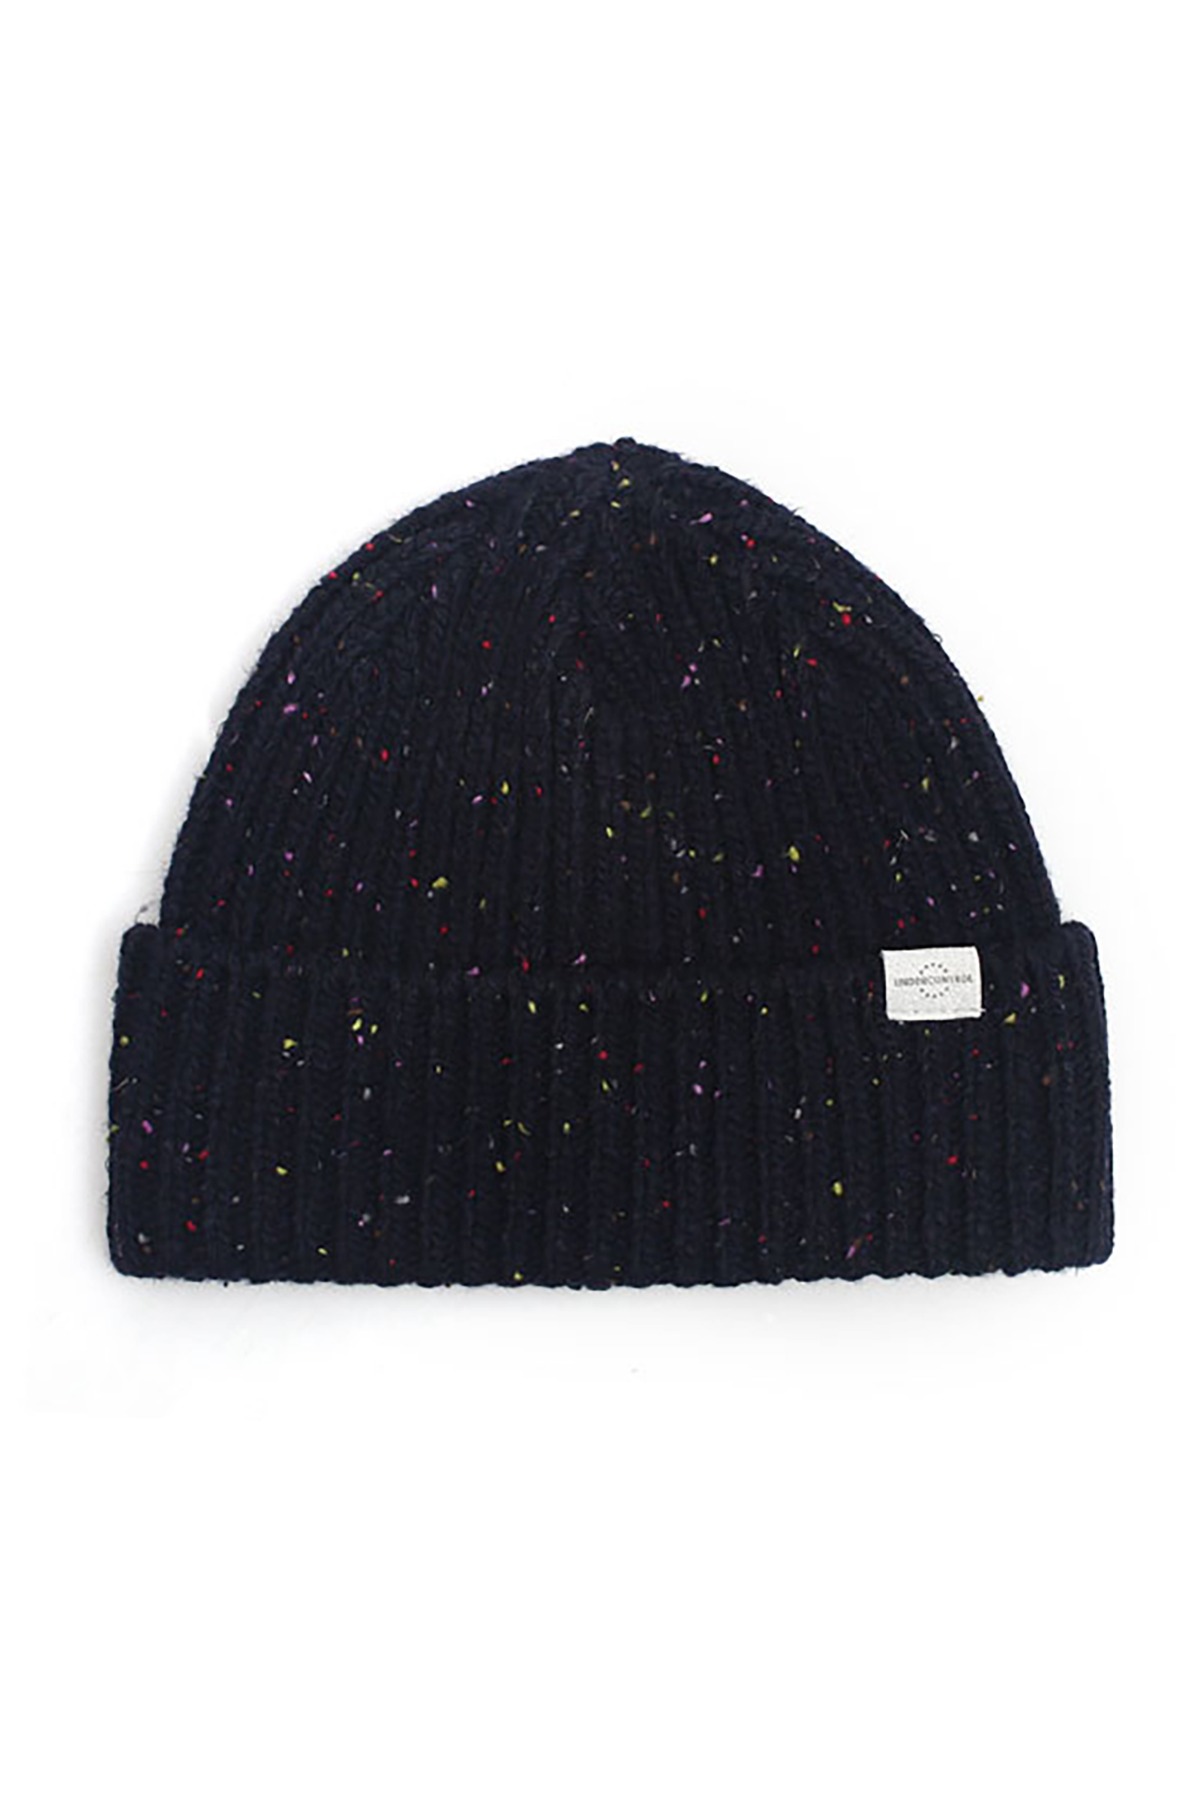 BEANIE / BOLD FIT / WOOL / NEP NAVY (BOX PACKAGE)